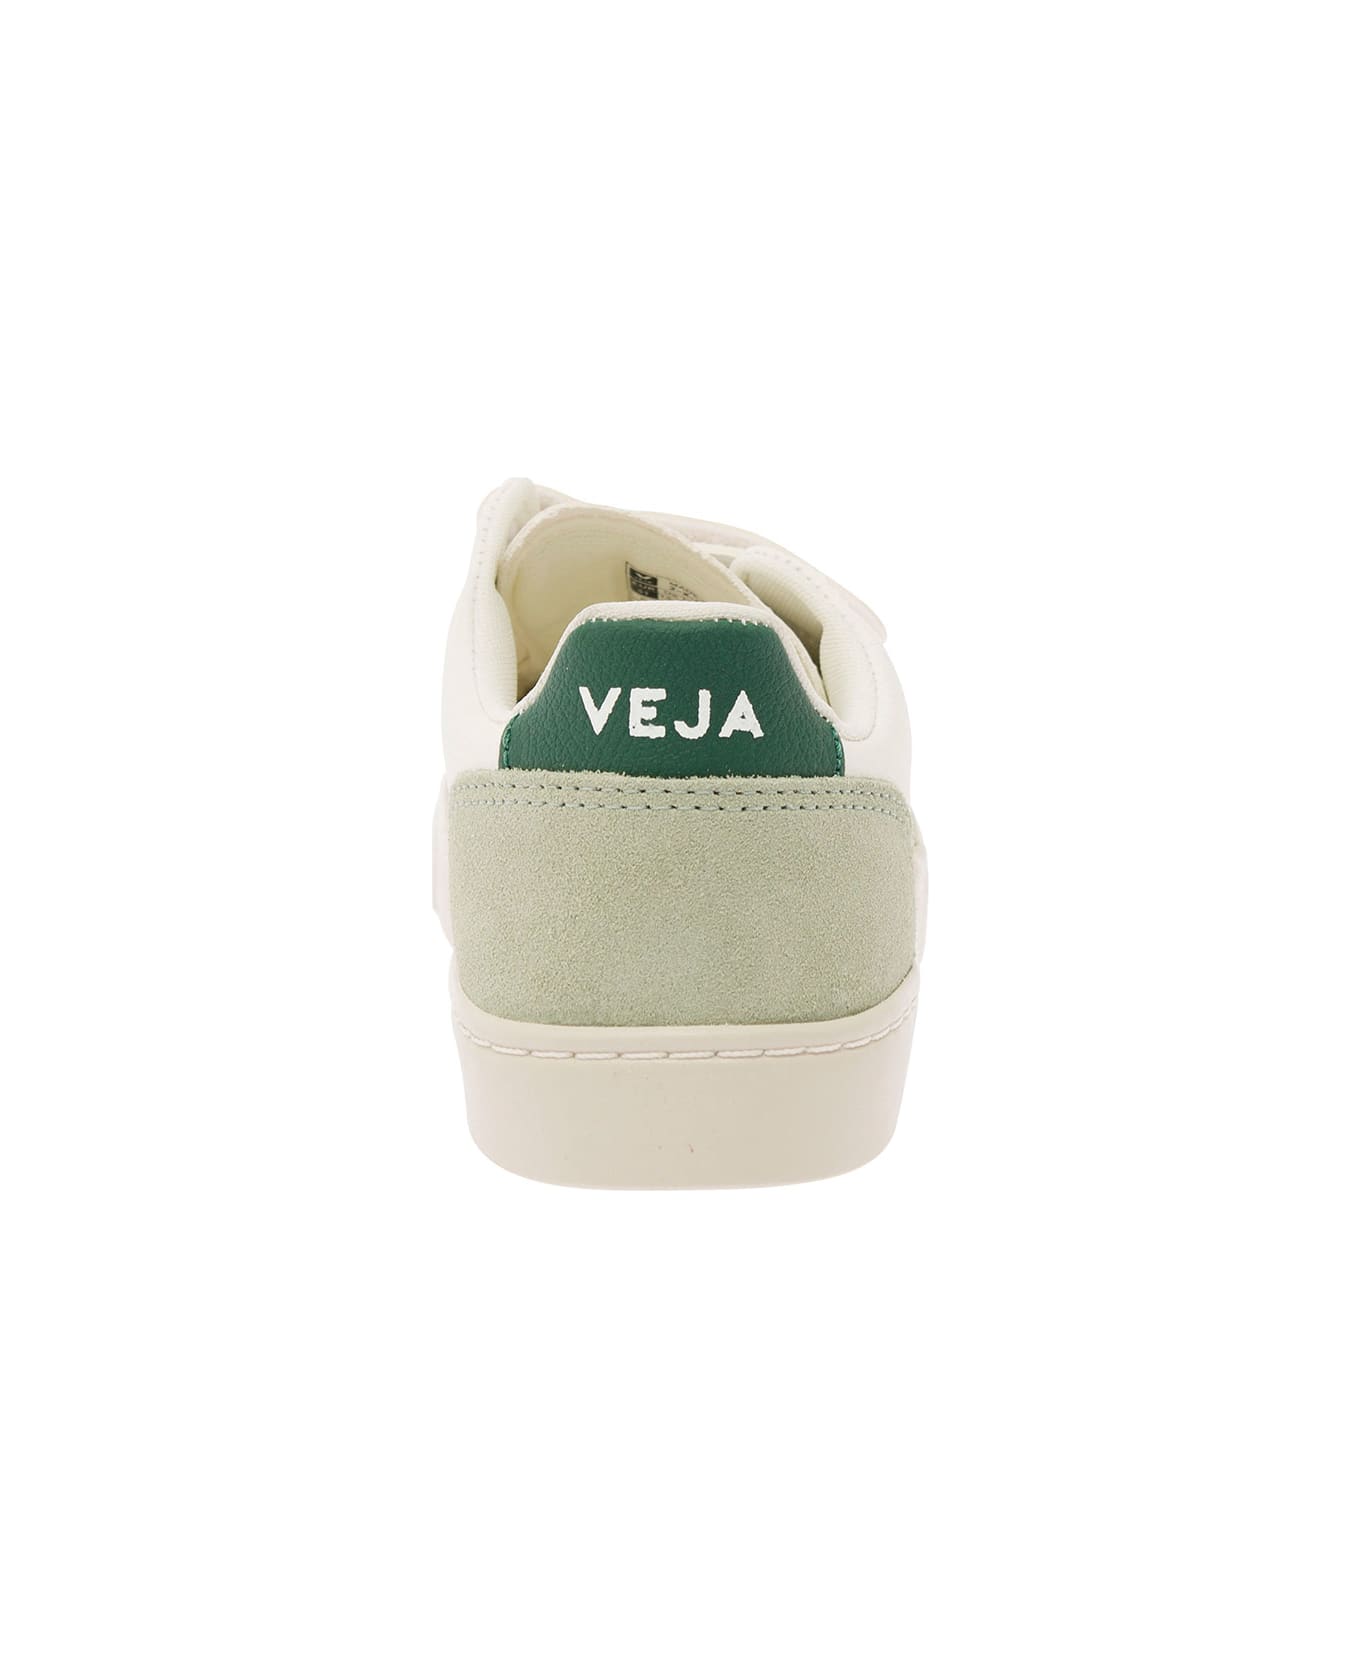 Veja White And Green Low Top Sneakers With Logo Patch In Leather And Suede Boy - Multicolor シューズ